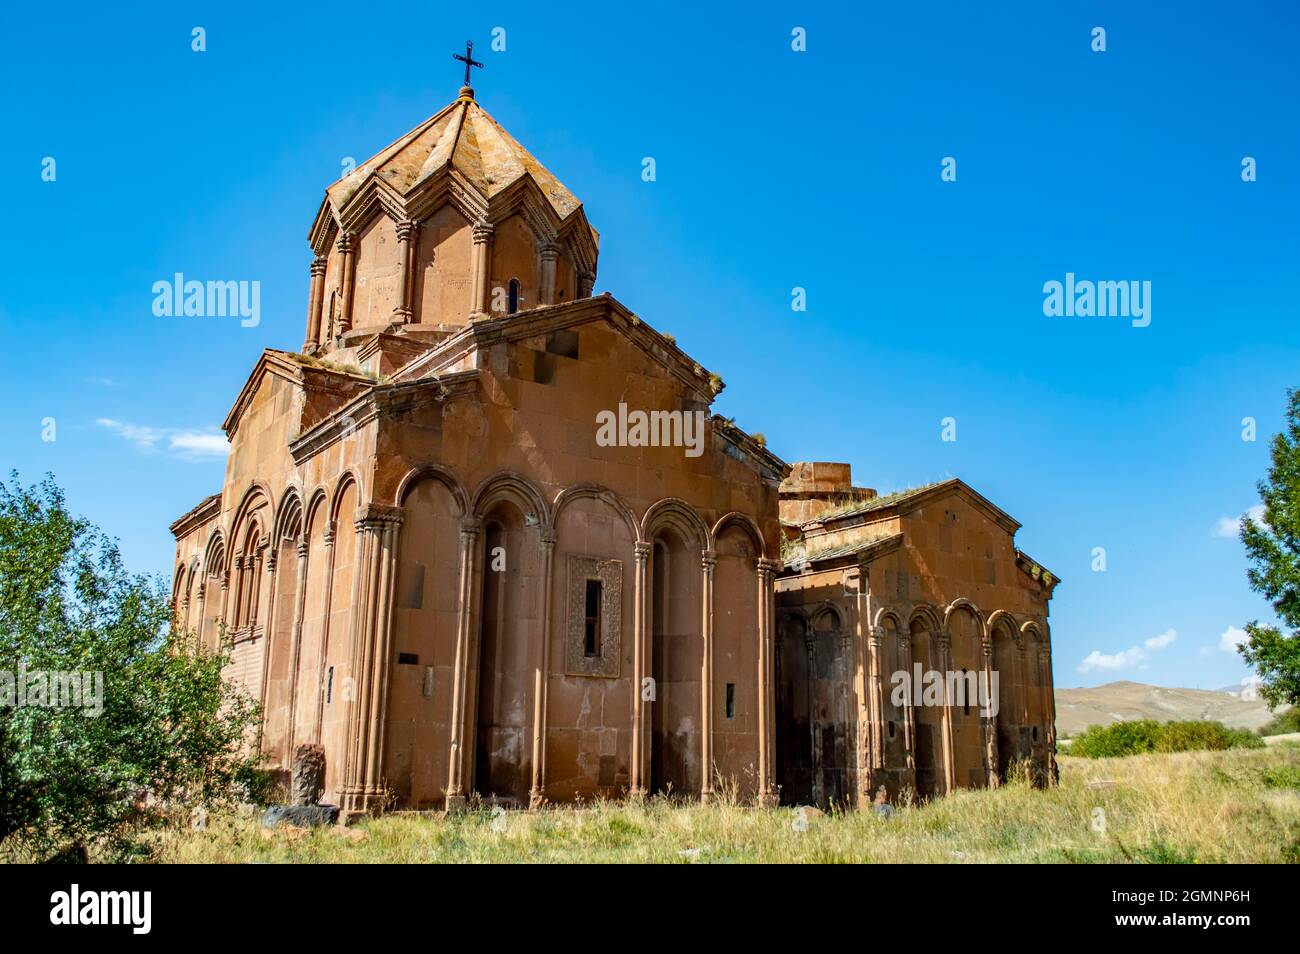 The main cathedral of the medieval Armenian monastery of Marmashen in Shirak province of Armenia Stock Photo